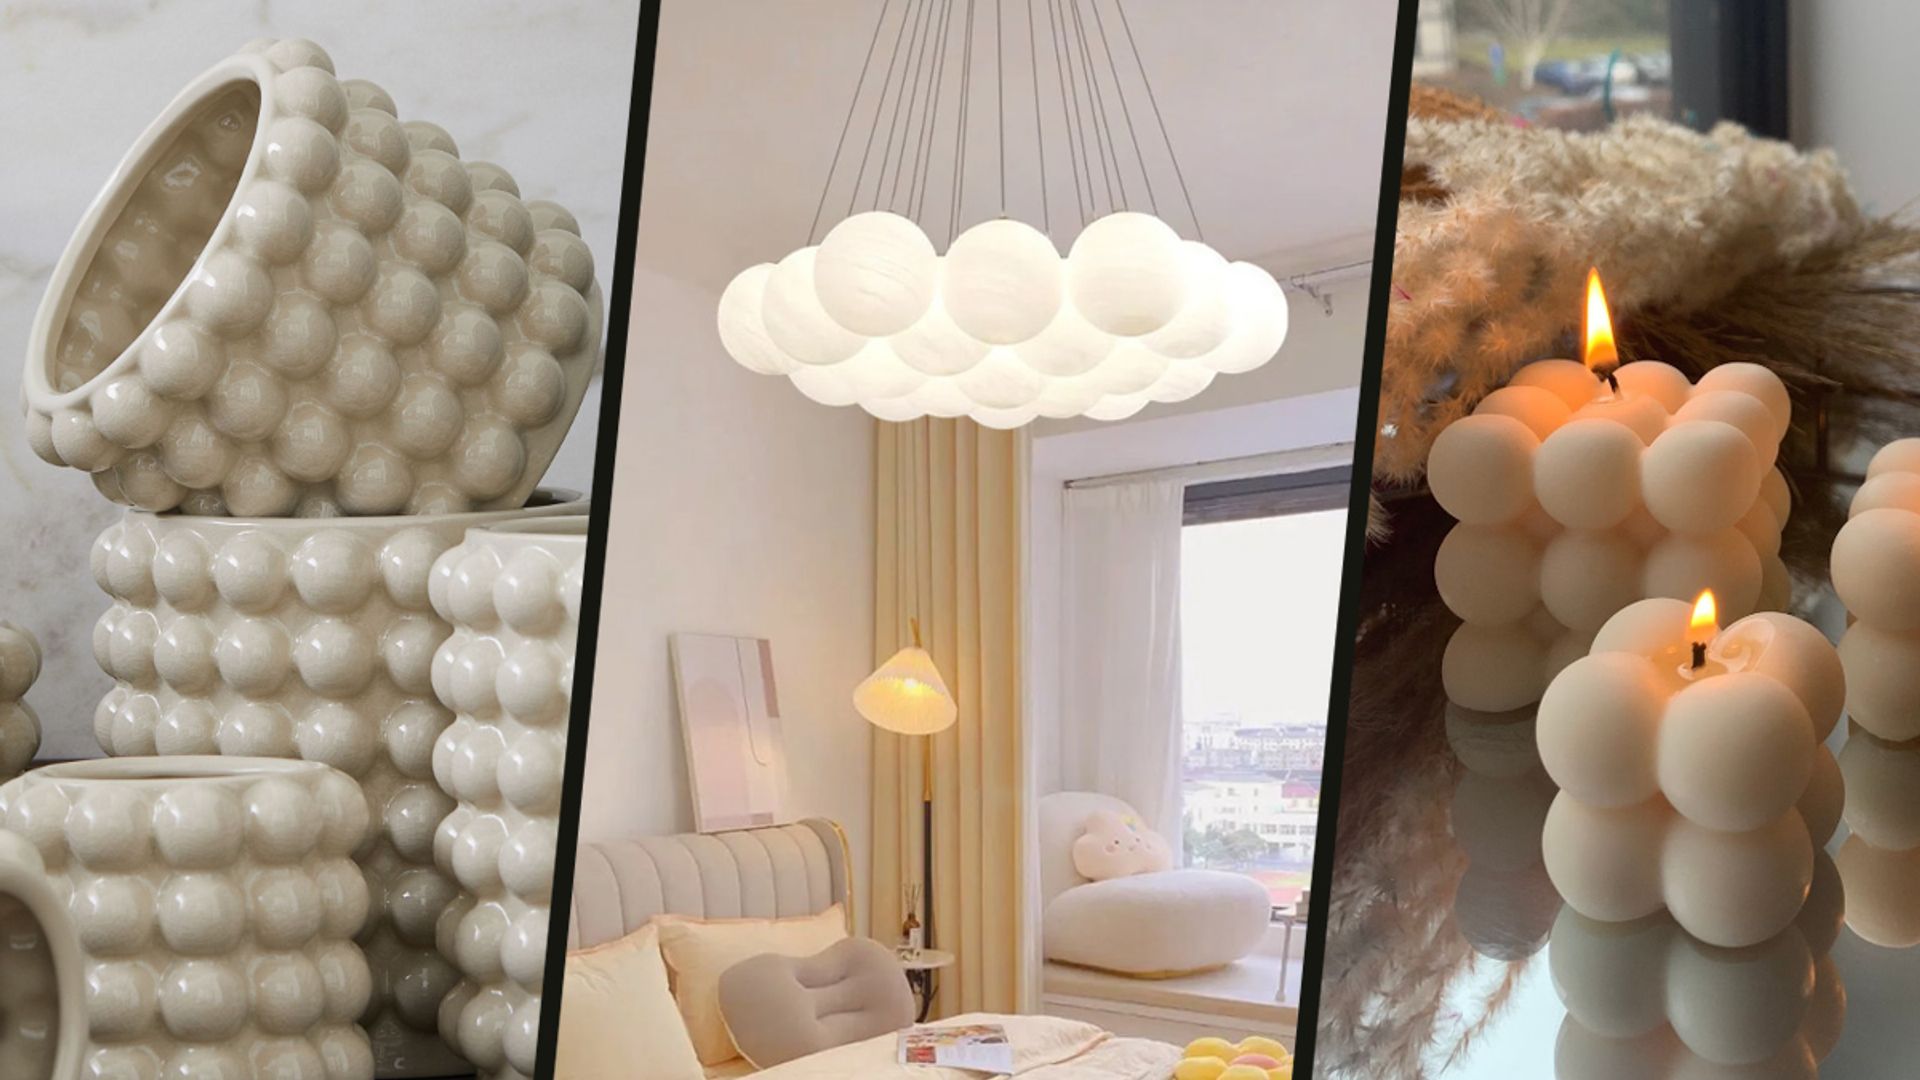 Best bubble home decor ideas 2023: Bubble lighting to mirrors, candles & more